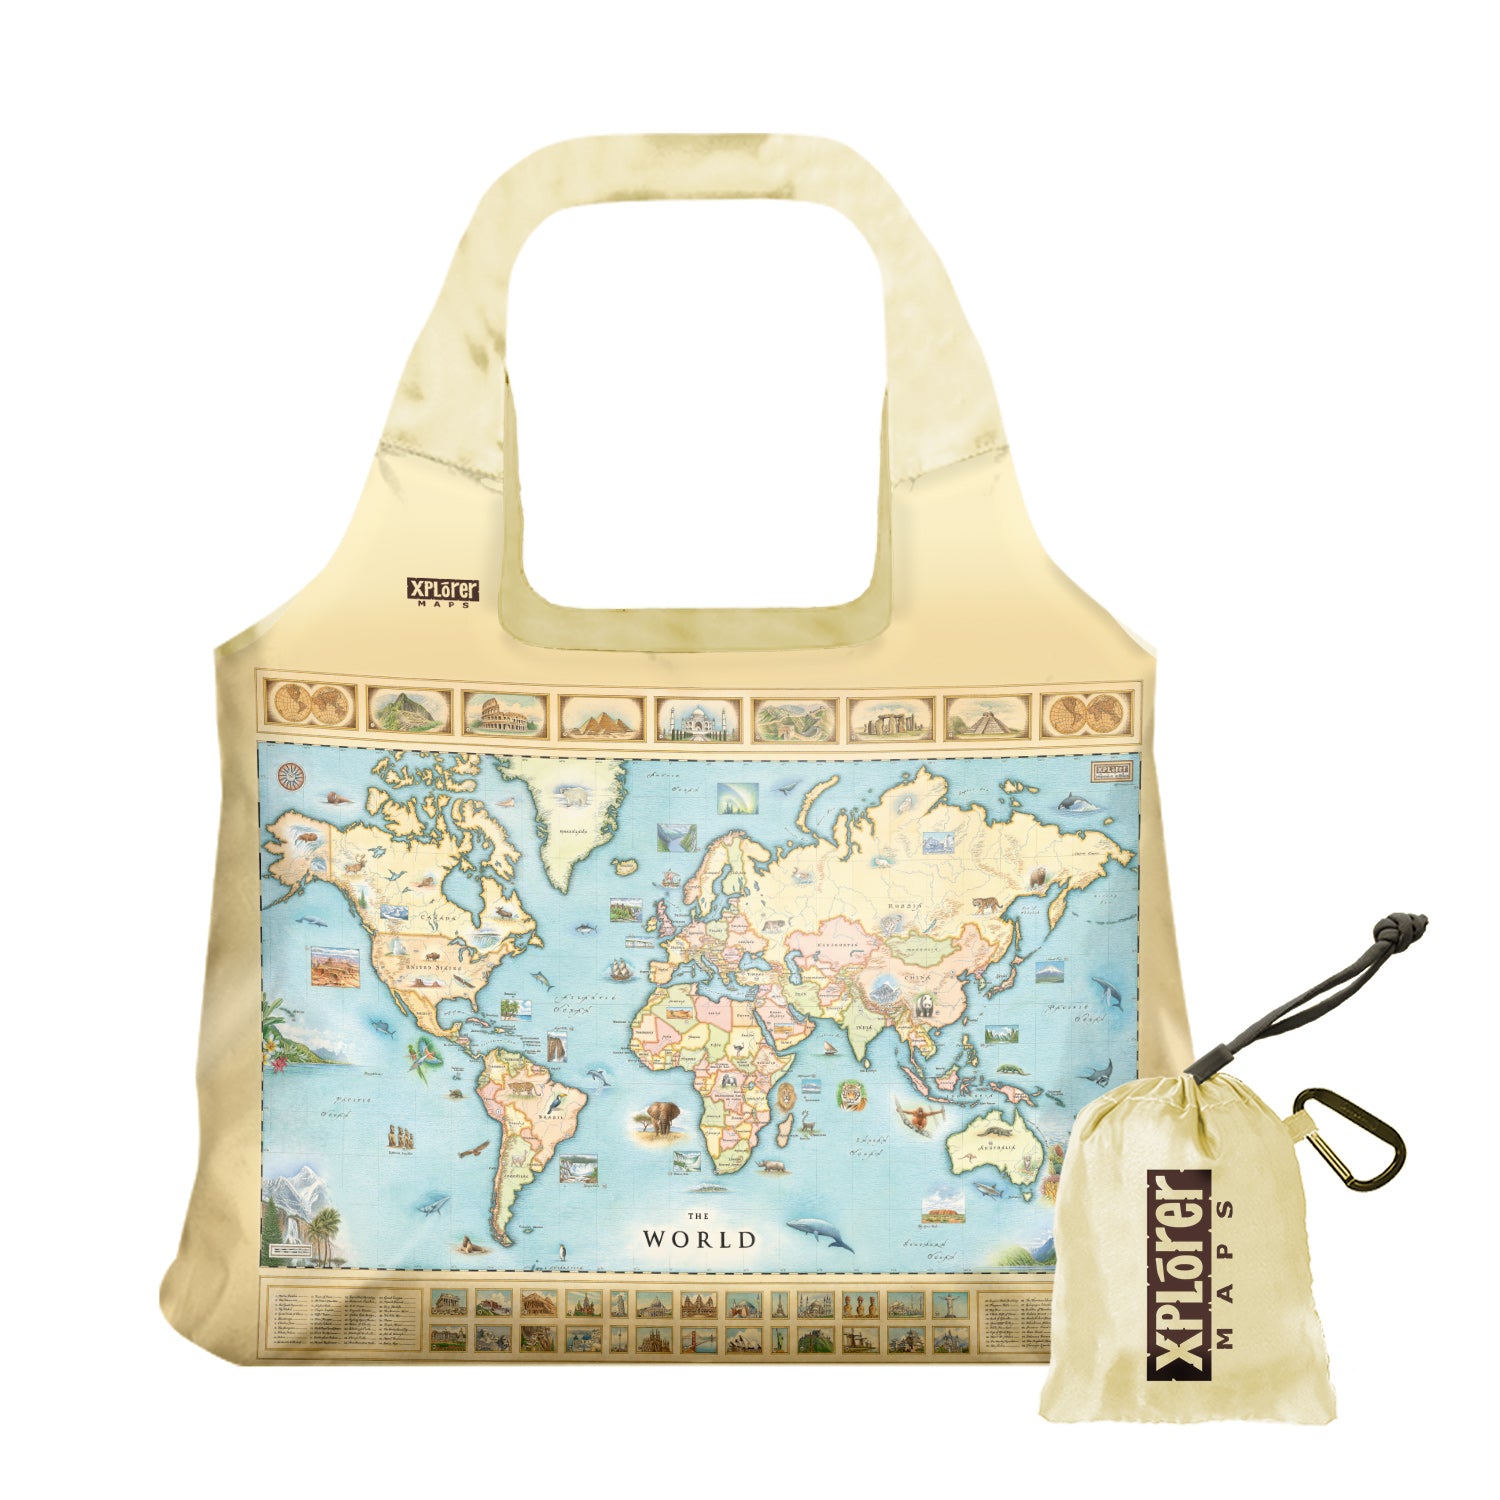 World Map Pouch Tote Bags by Xplorer Maps. The map features the entire world with illustrations of significant places and major flora and fauna. Some places include Machu Pichu, the Eiffel Tower, Mount Everest, and Easter Island.